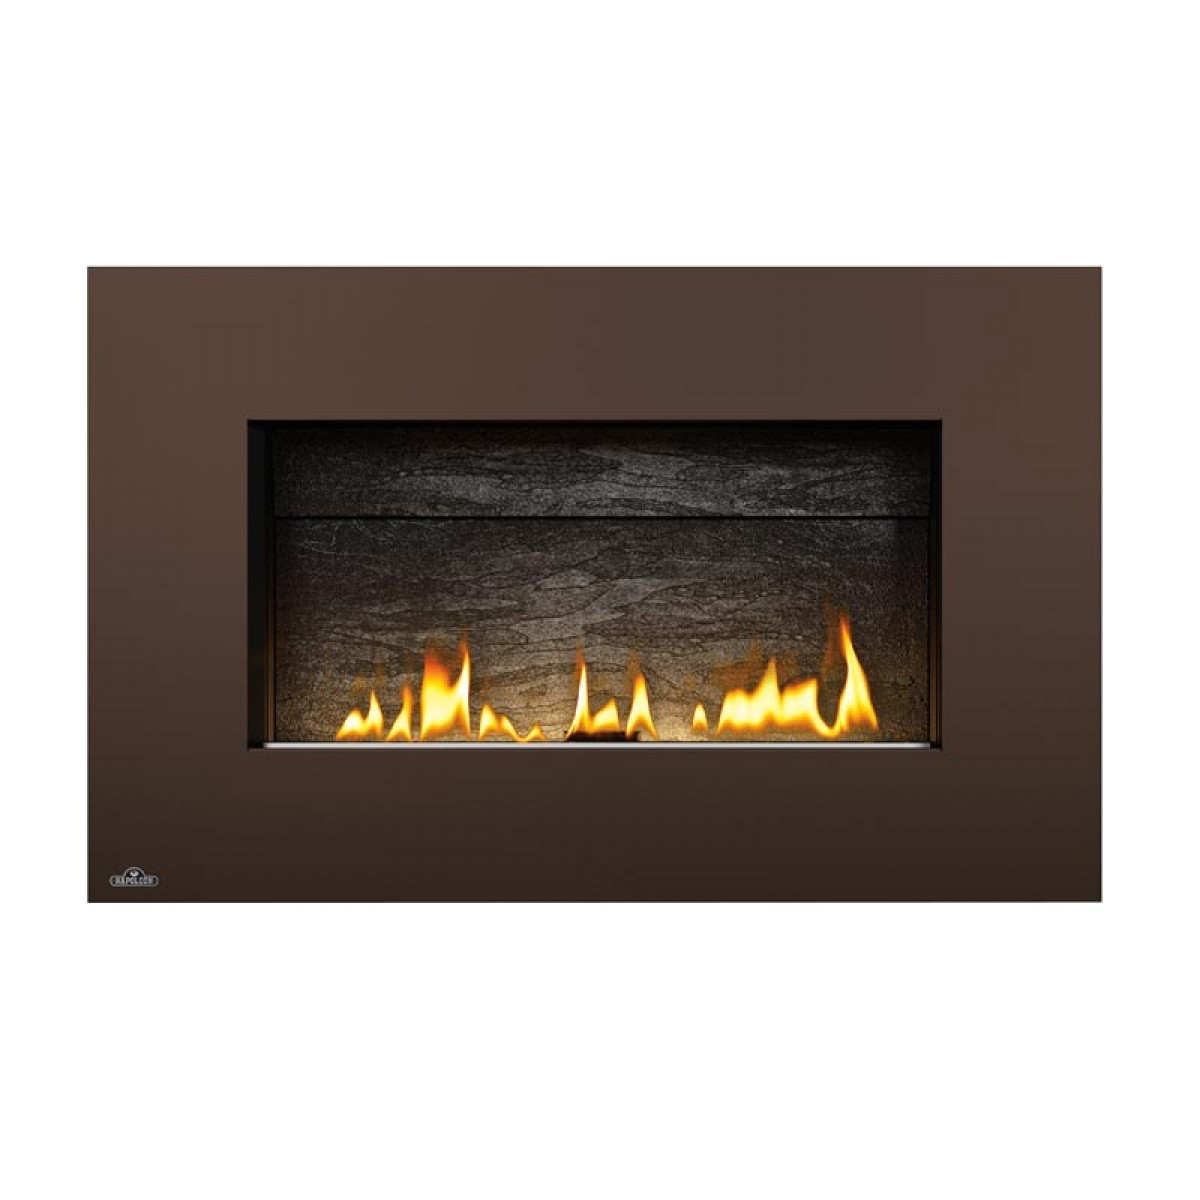 Direct Vent Gas Fireplace Reviews 2019 Napoleon Whvf31n Plazmafire Vent Free Natural Gas